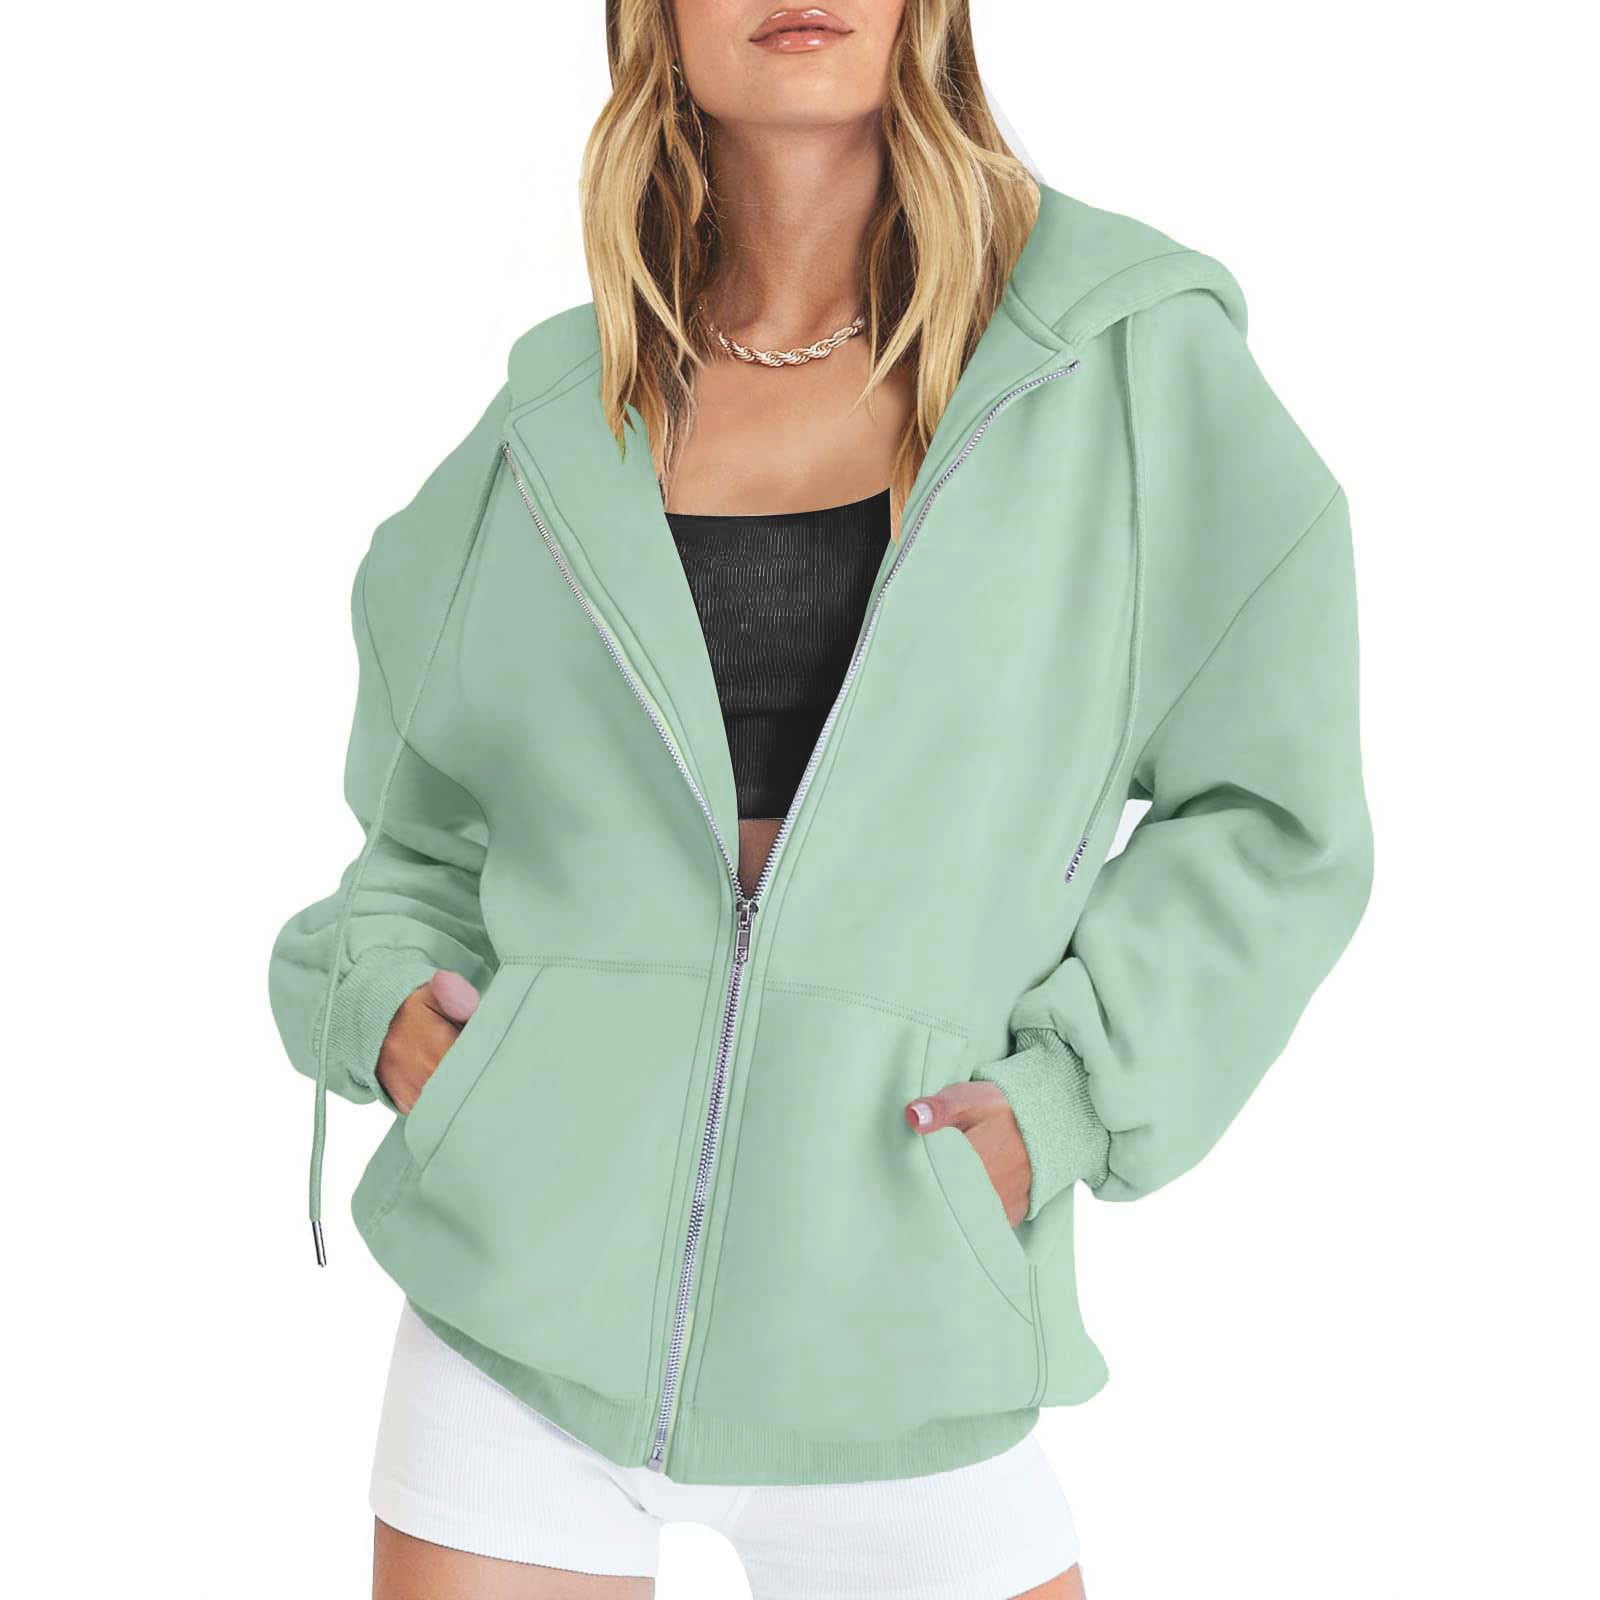 Dyfzdhu Zip up Hoodie for Women Fall Oversized Sweatshirt With Pocket Casual  Drawstring Solid Color Long Sleeve Jacket Sky Blue 